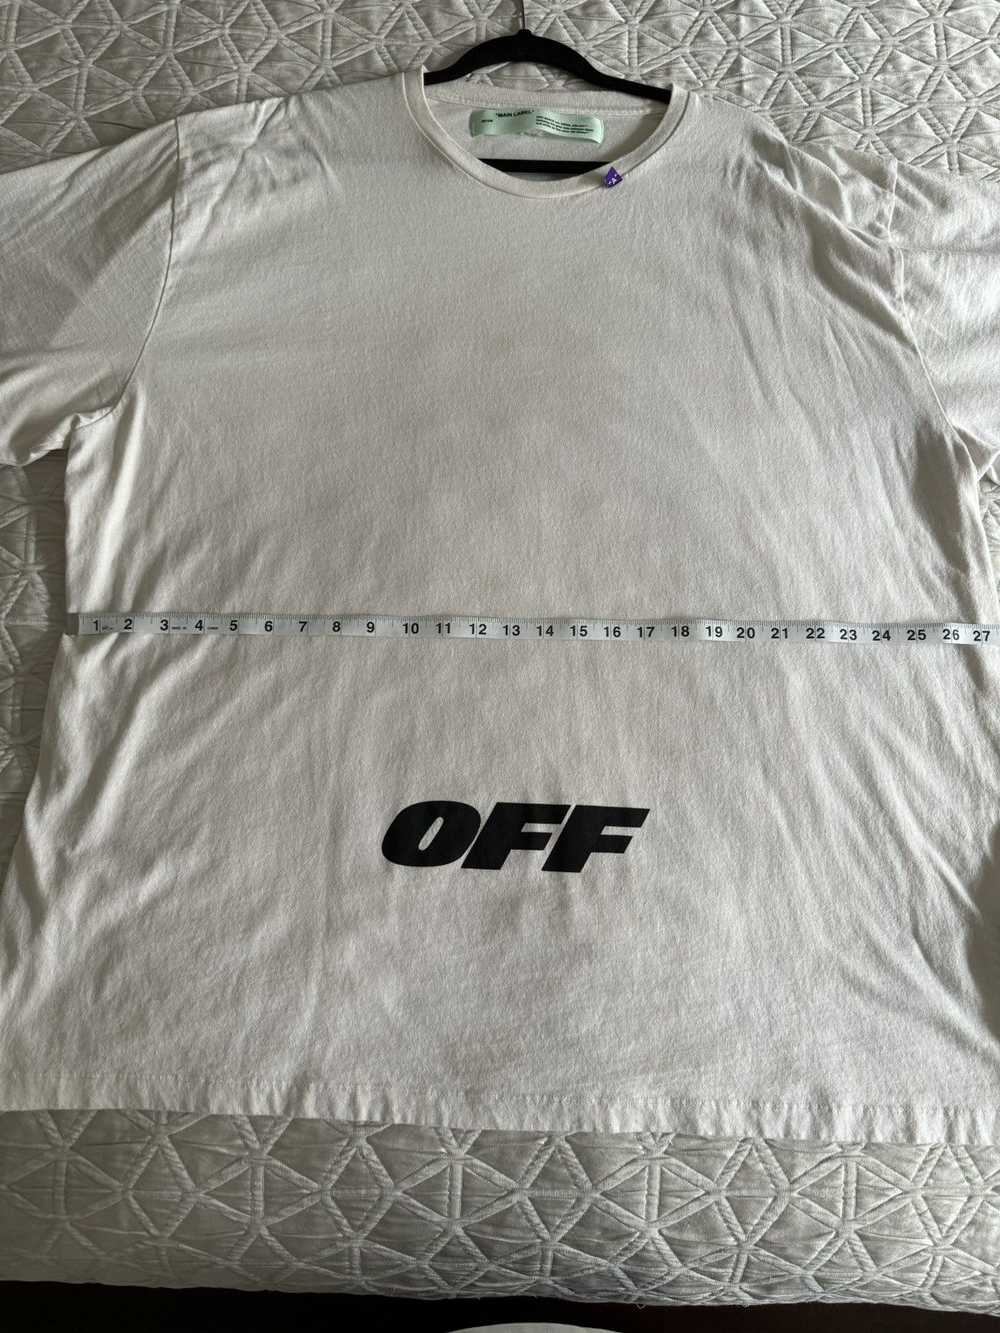 Off-White Off-White ‘Wing Off’ Tee - image 5